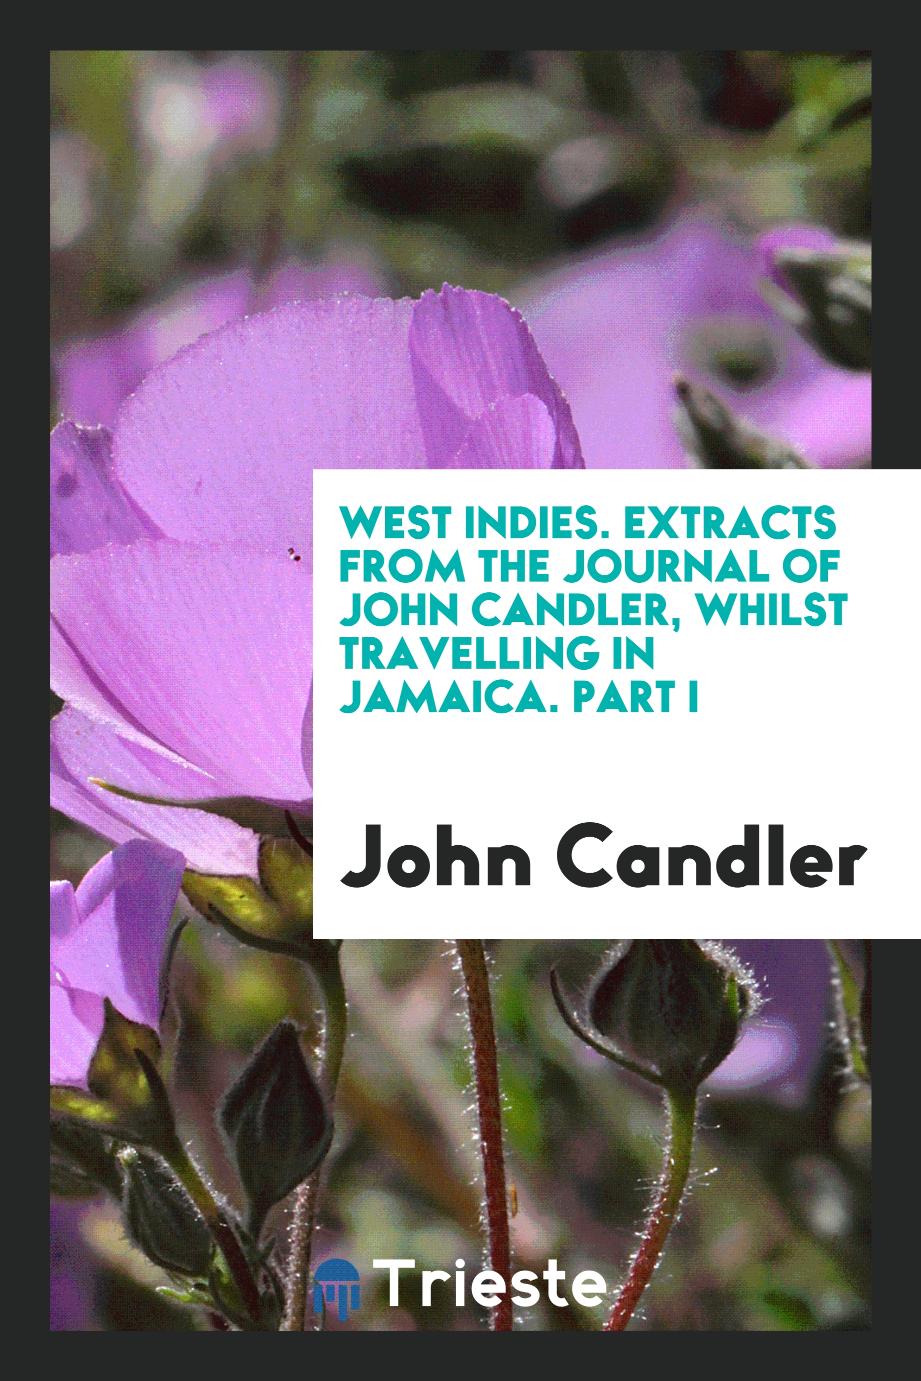 West Indies. Extracts from the journal of John Candler, whilst travelling in Jamaica. Part I